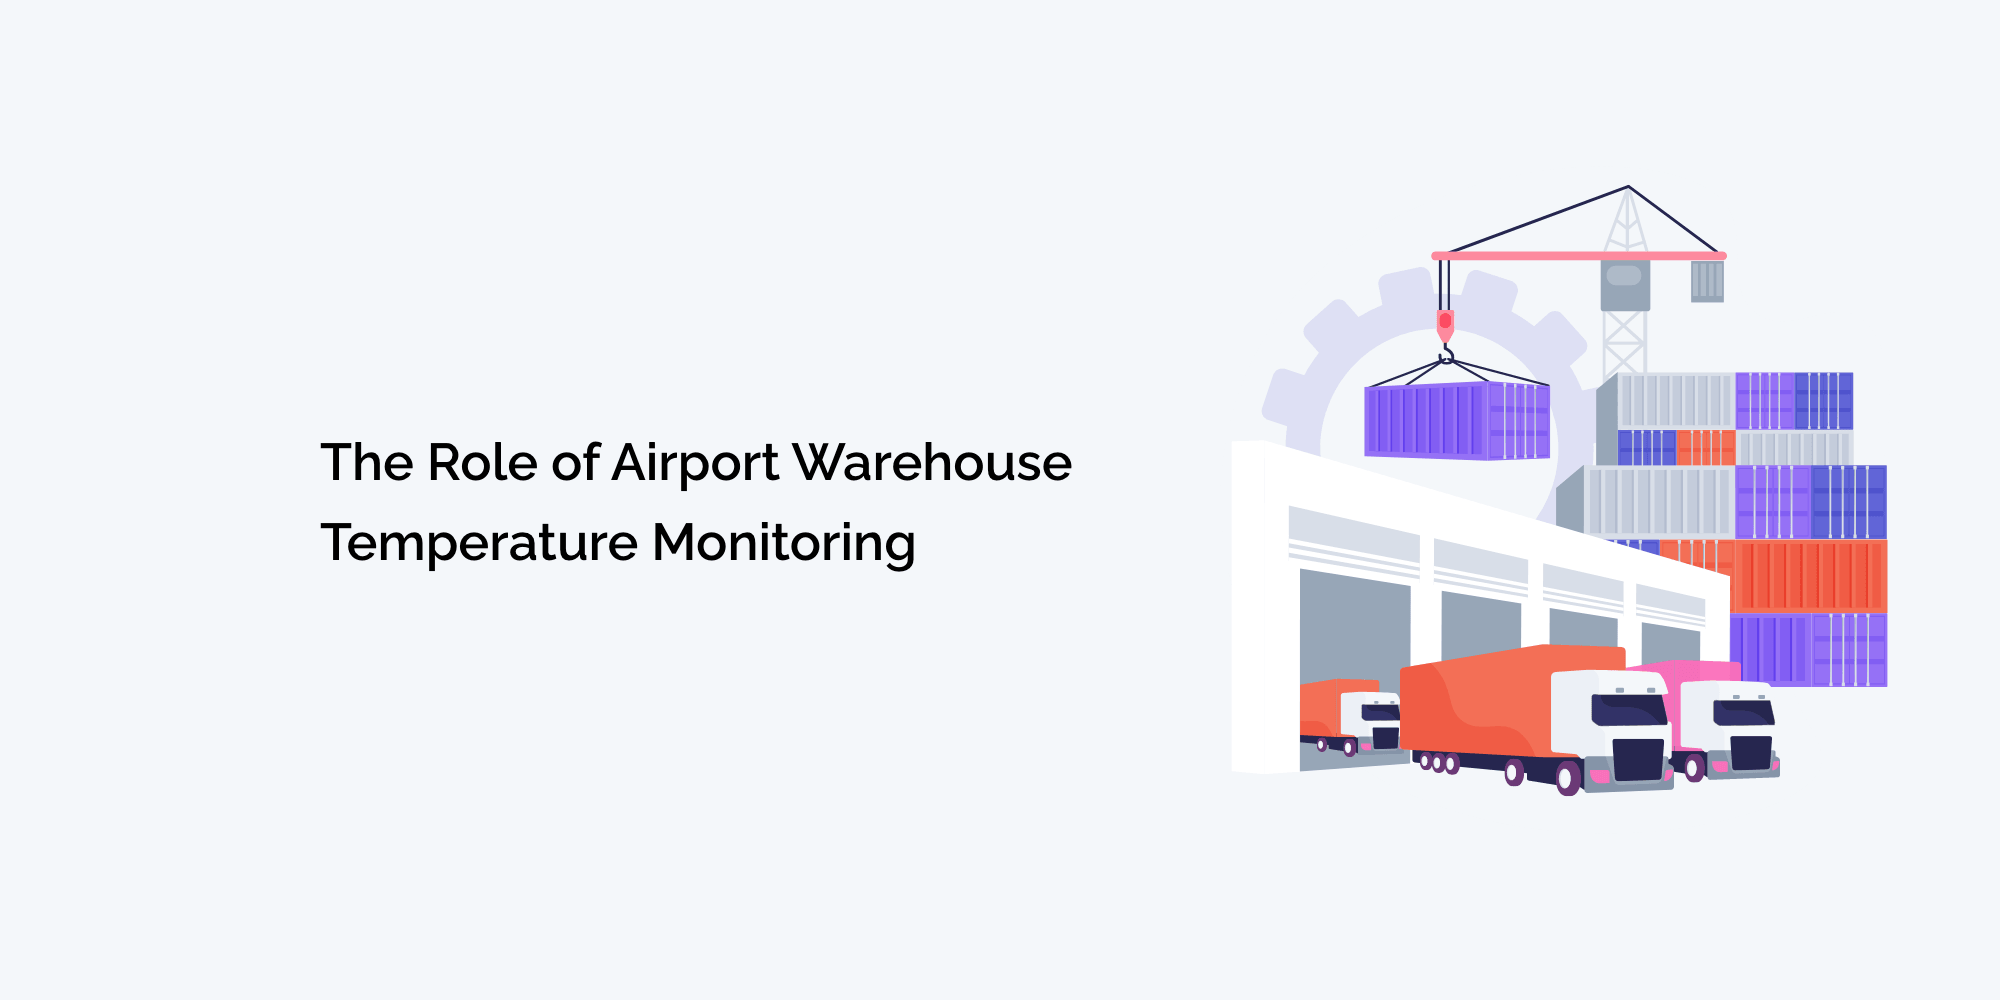 Enhancing Supply Chain Resilience: The Role of Airport Warehouse Temperature Monitoring